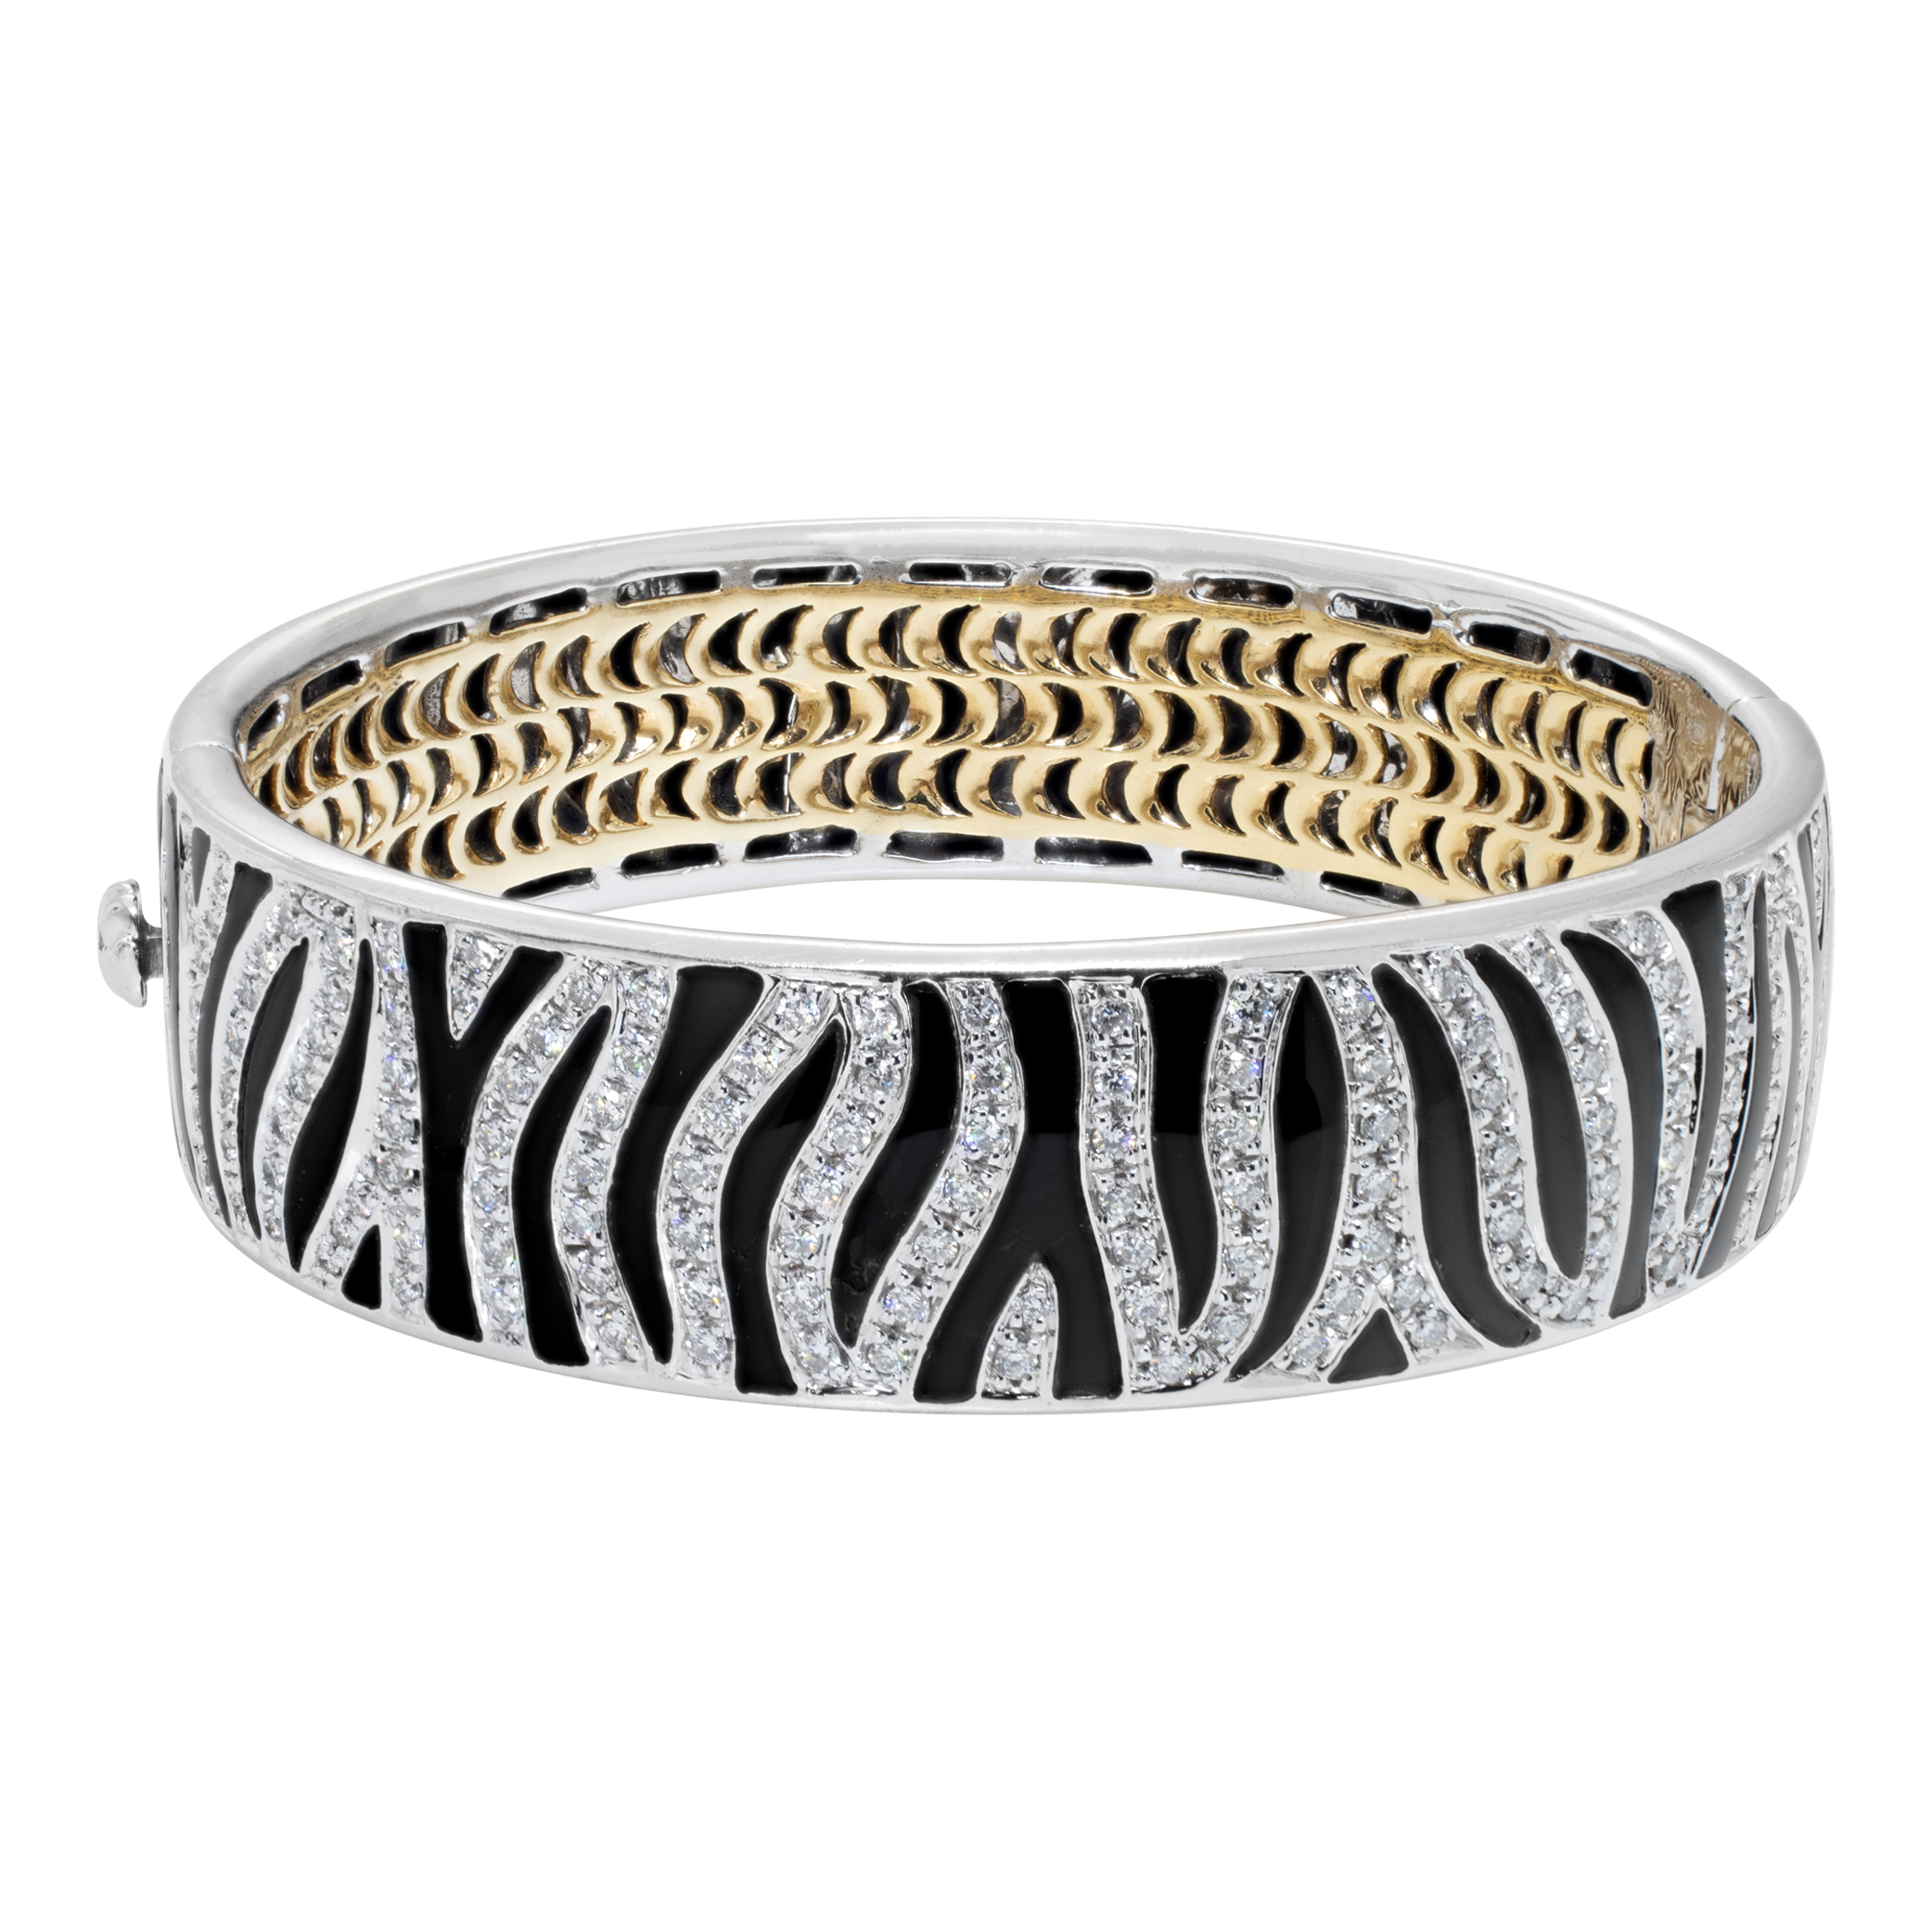 Roberto Coin Zebra Collection Bangle In 18k Yellow & White Gold With Black Enamel And Approximately 1.40 Carats In Diamonds (G-H Color, Si1 Clarity).